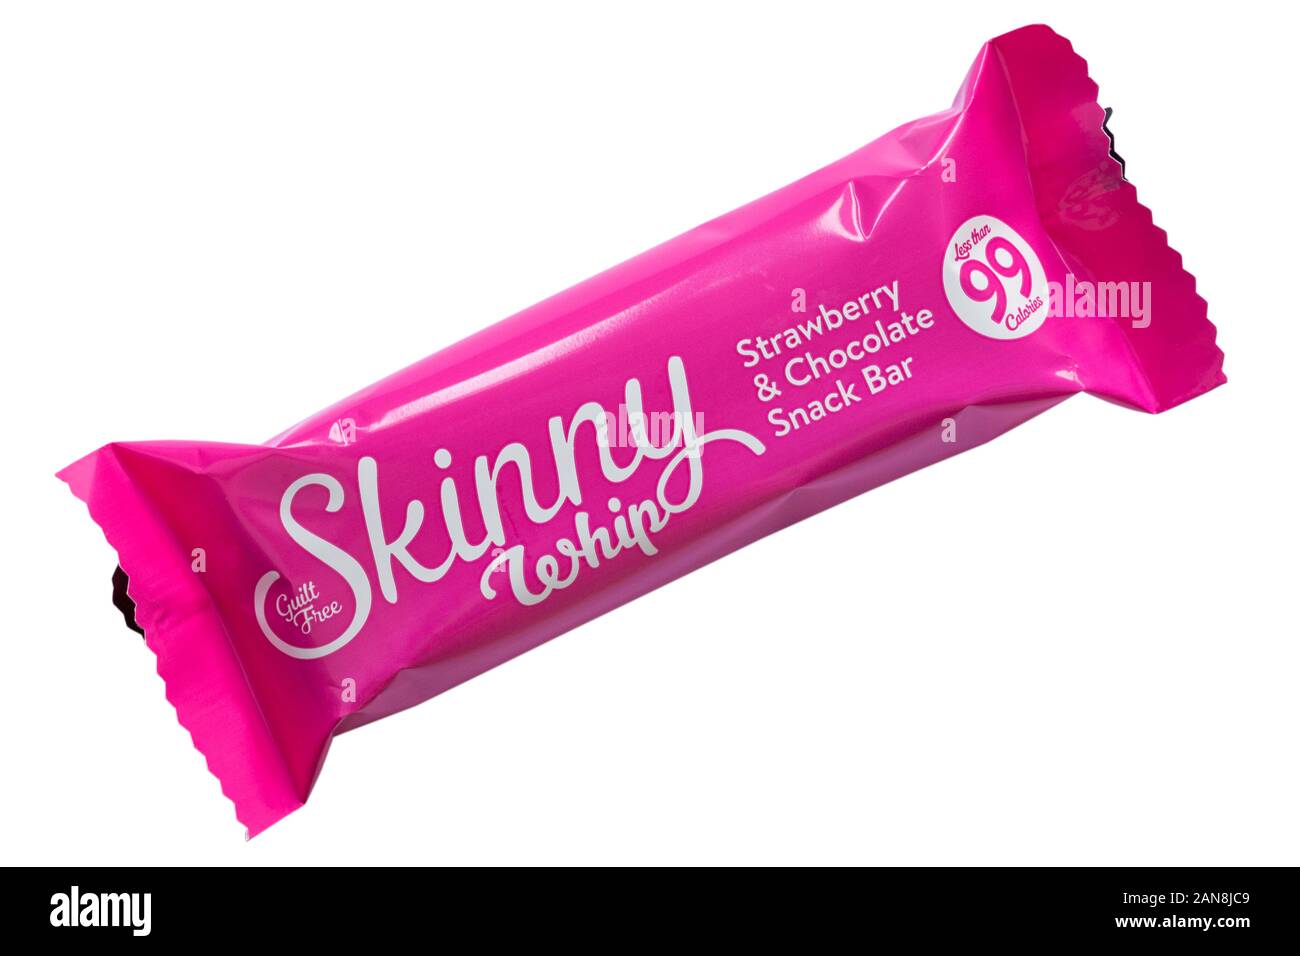 guilt free Skinny Whip Strawberry & Chocolate Snack Bar isolated on white background - less than 99 calories Stock Photo